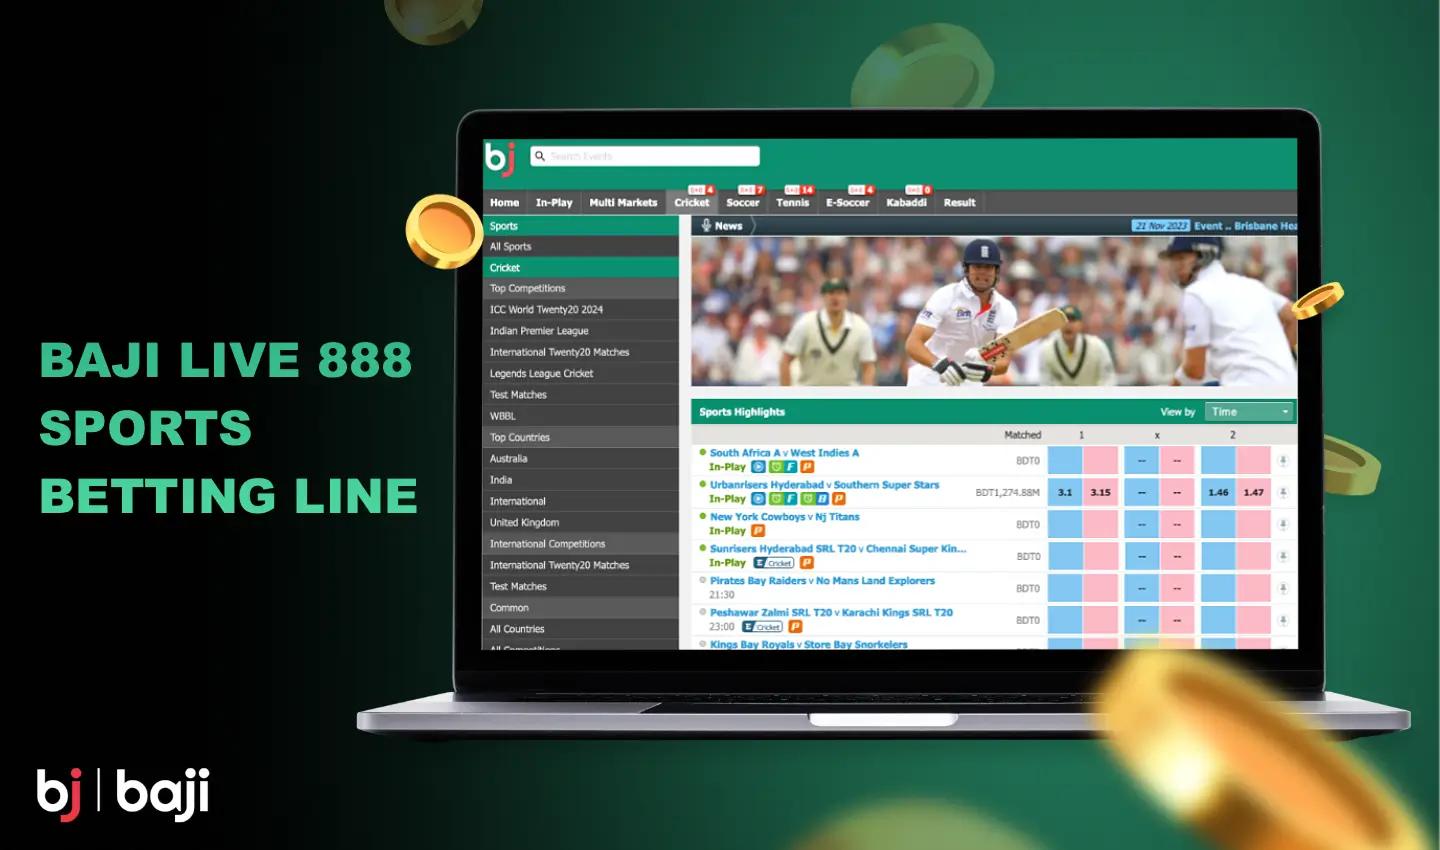 Baji 888 has a wide range of betting lines available on popular sports